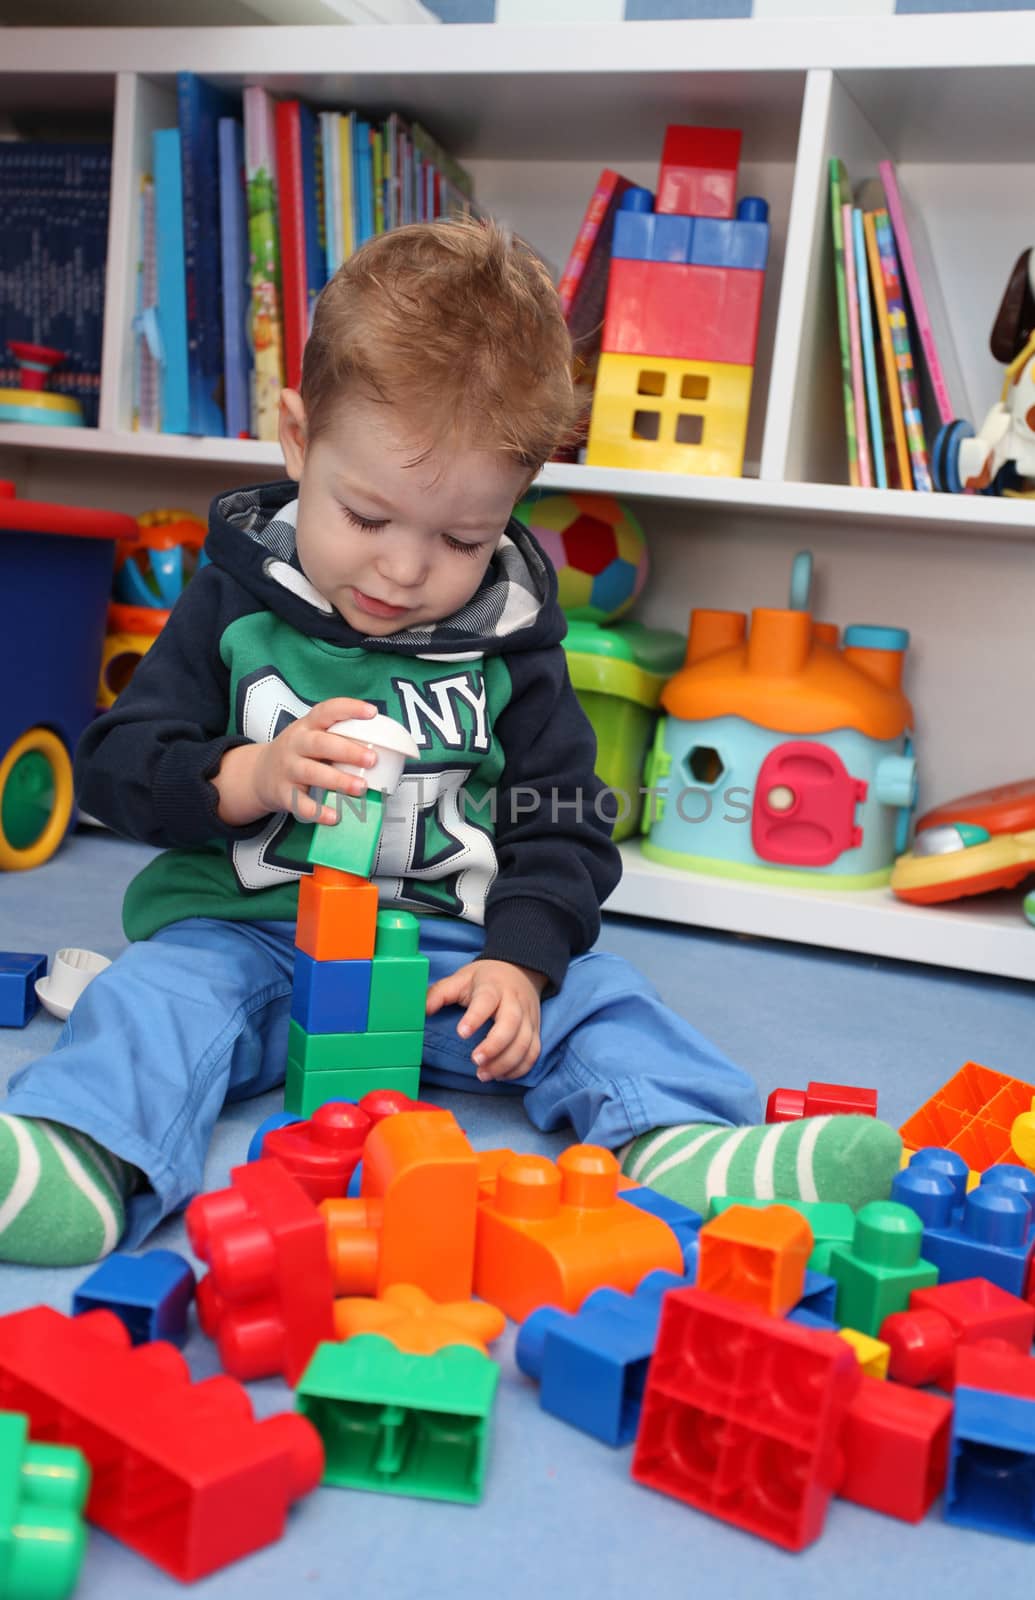 A baby boy playing with plastic blocks by vladacanon